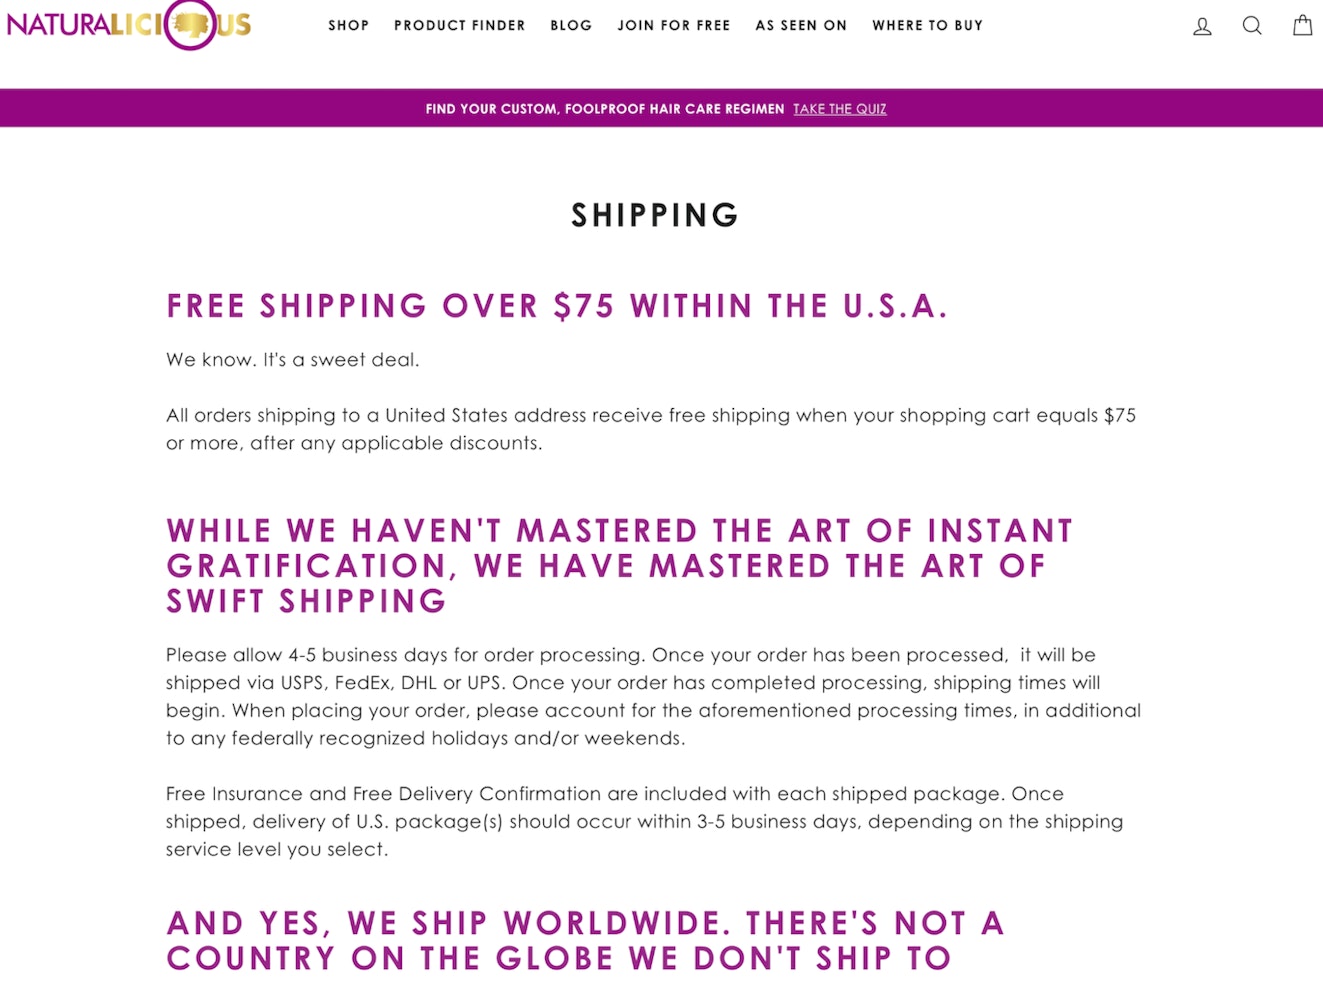 naturalicious shipping policy page example